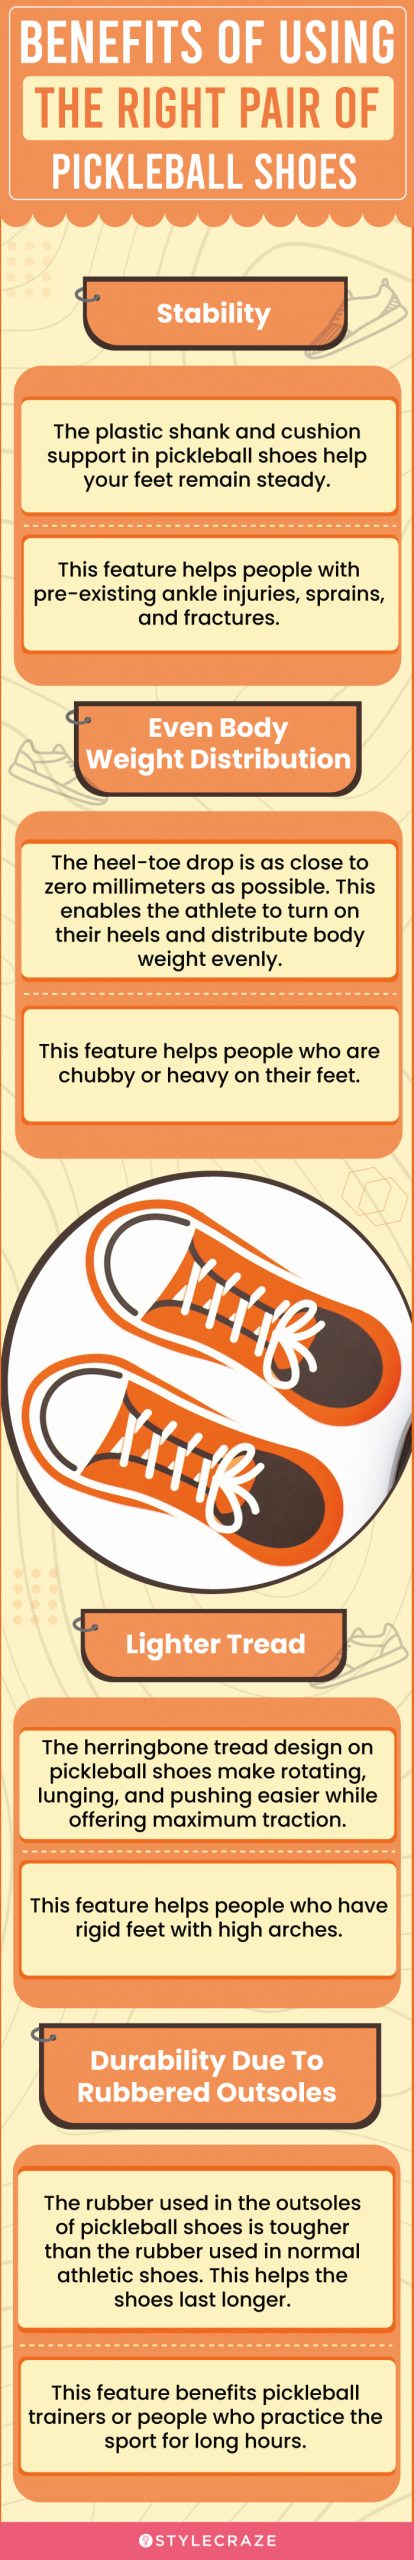 Benefits Of Using The Right Pair Of Pickleball Shoes (infographic)